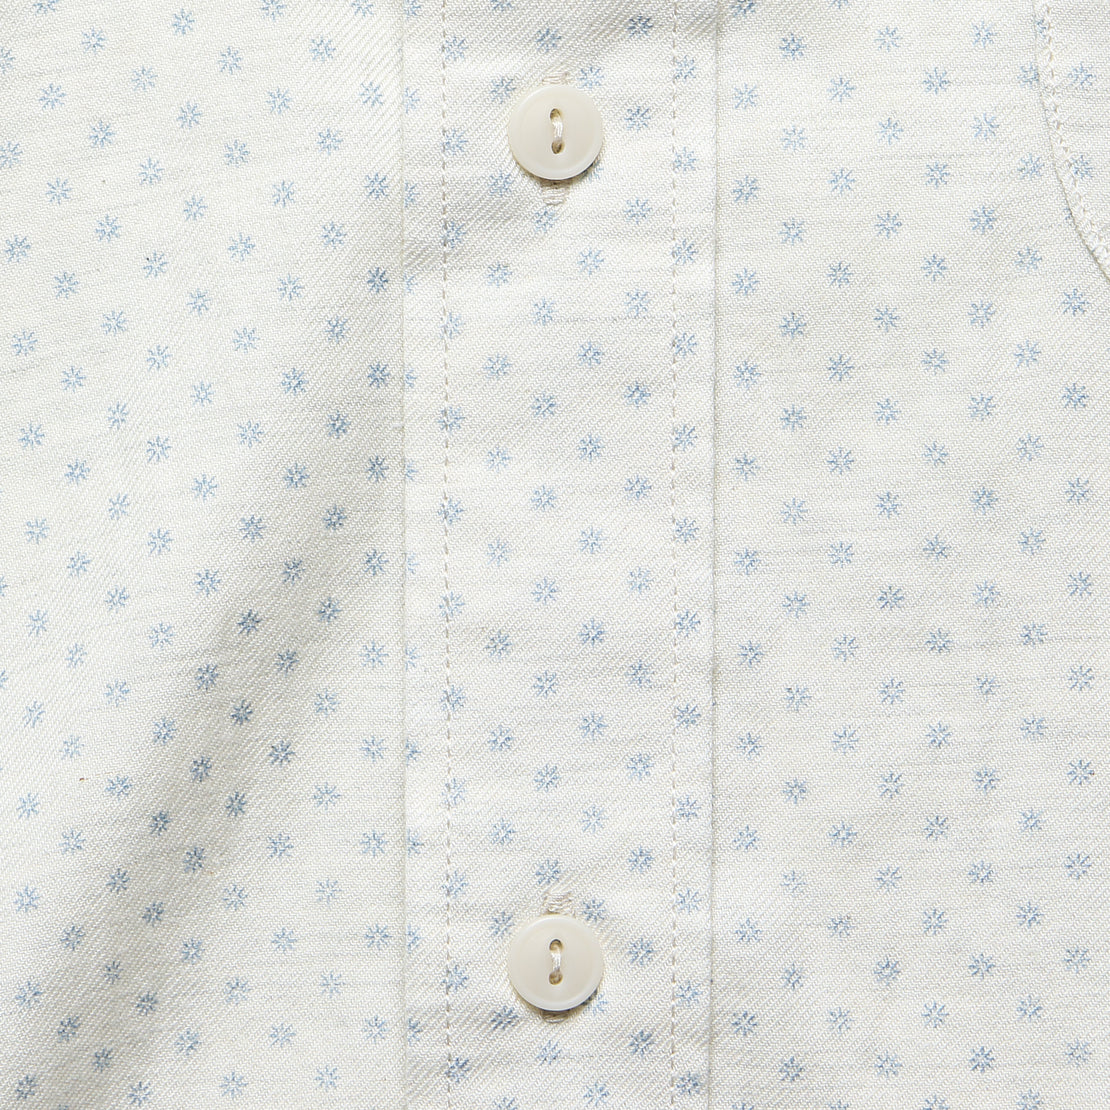 Pacific Shirt - Sunburst Print - Faherty - STAG Provisions - Tops - S/S Woven - Other Pattern